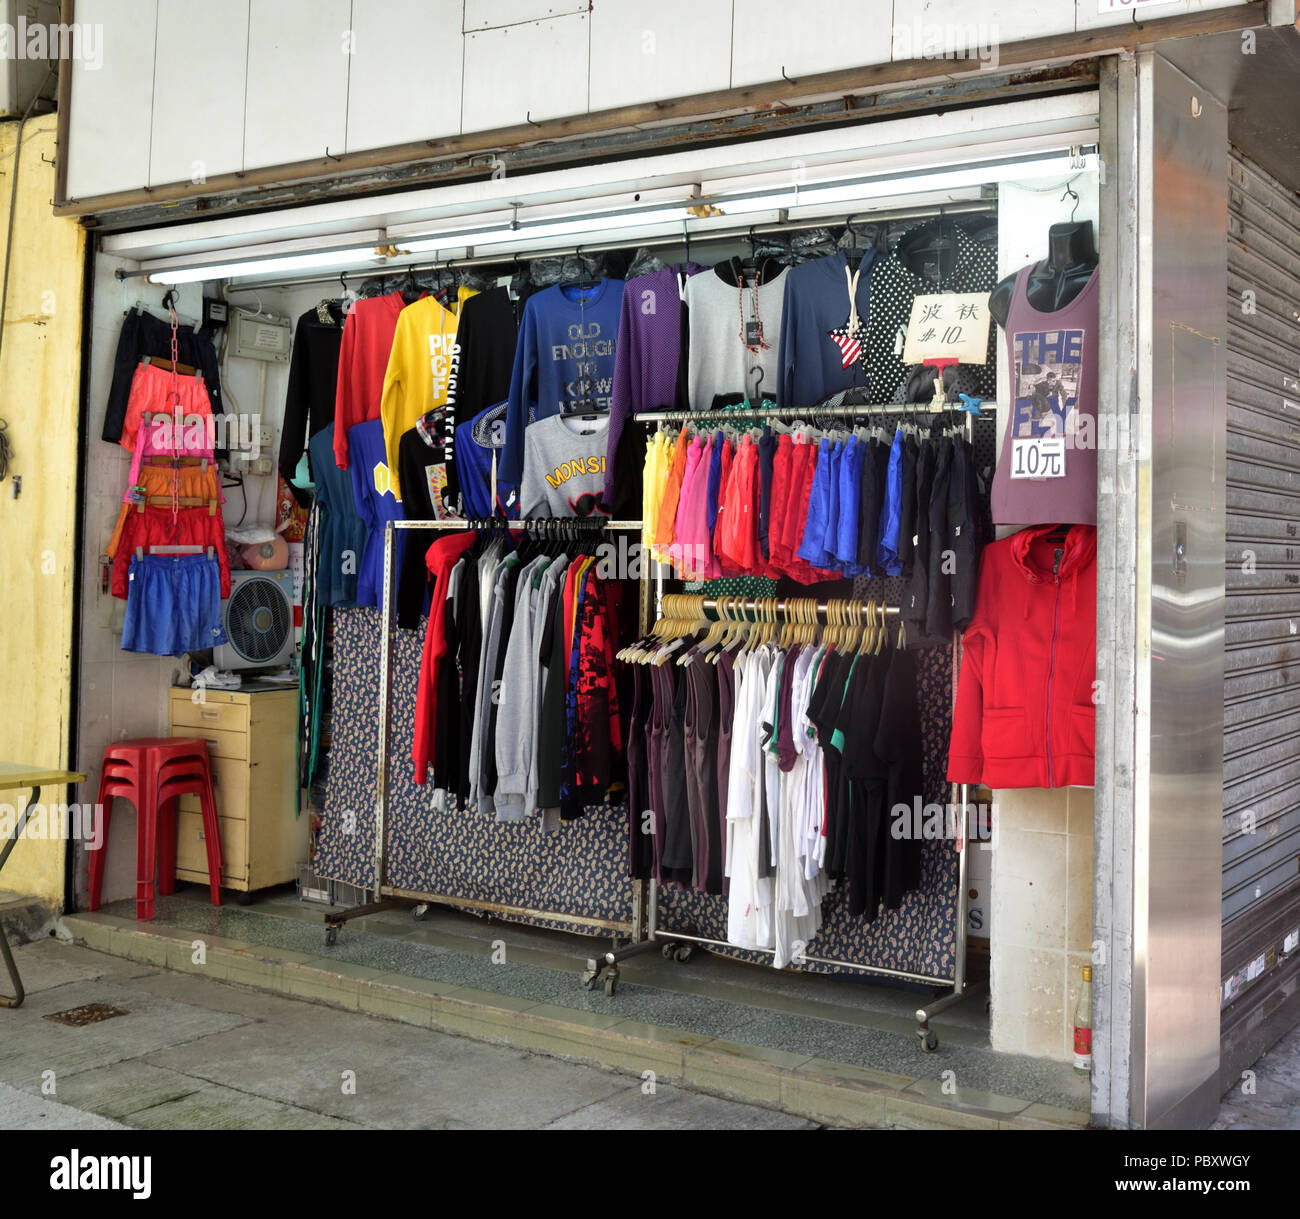 A stand selling clothes in an alley, Sham Shui Po, Kowloon, Hong Kong. Stock Photo